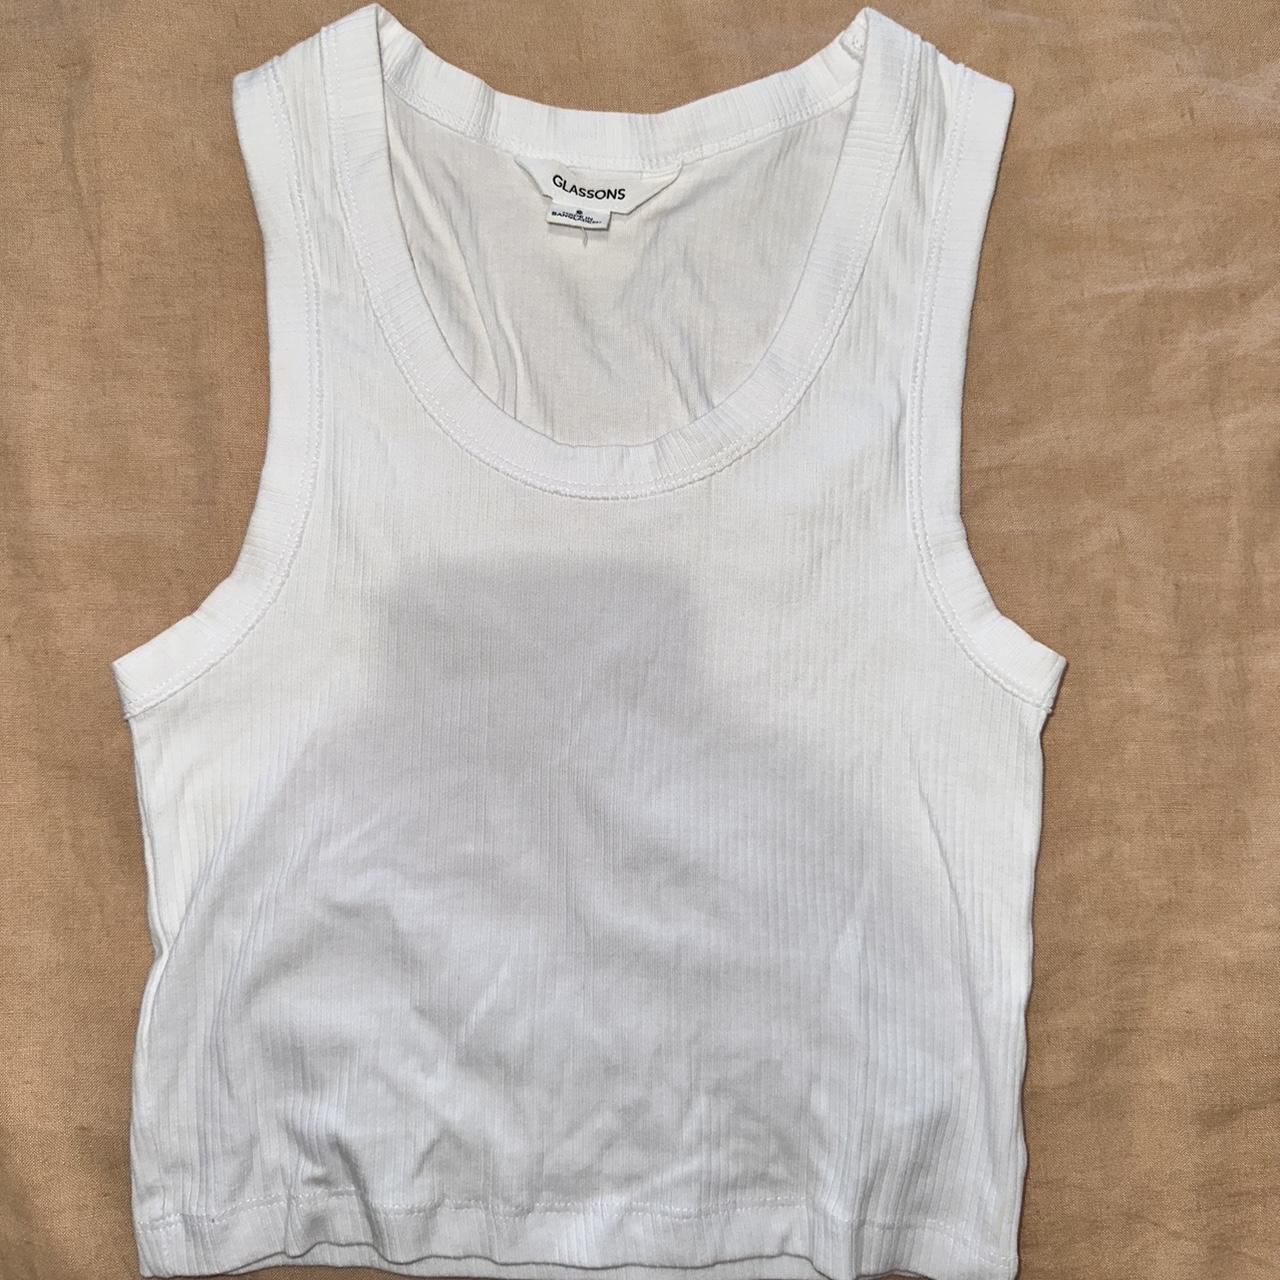 Glassons white ribbed tank size small - Depop